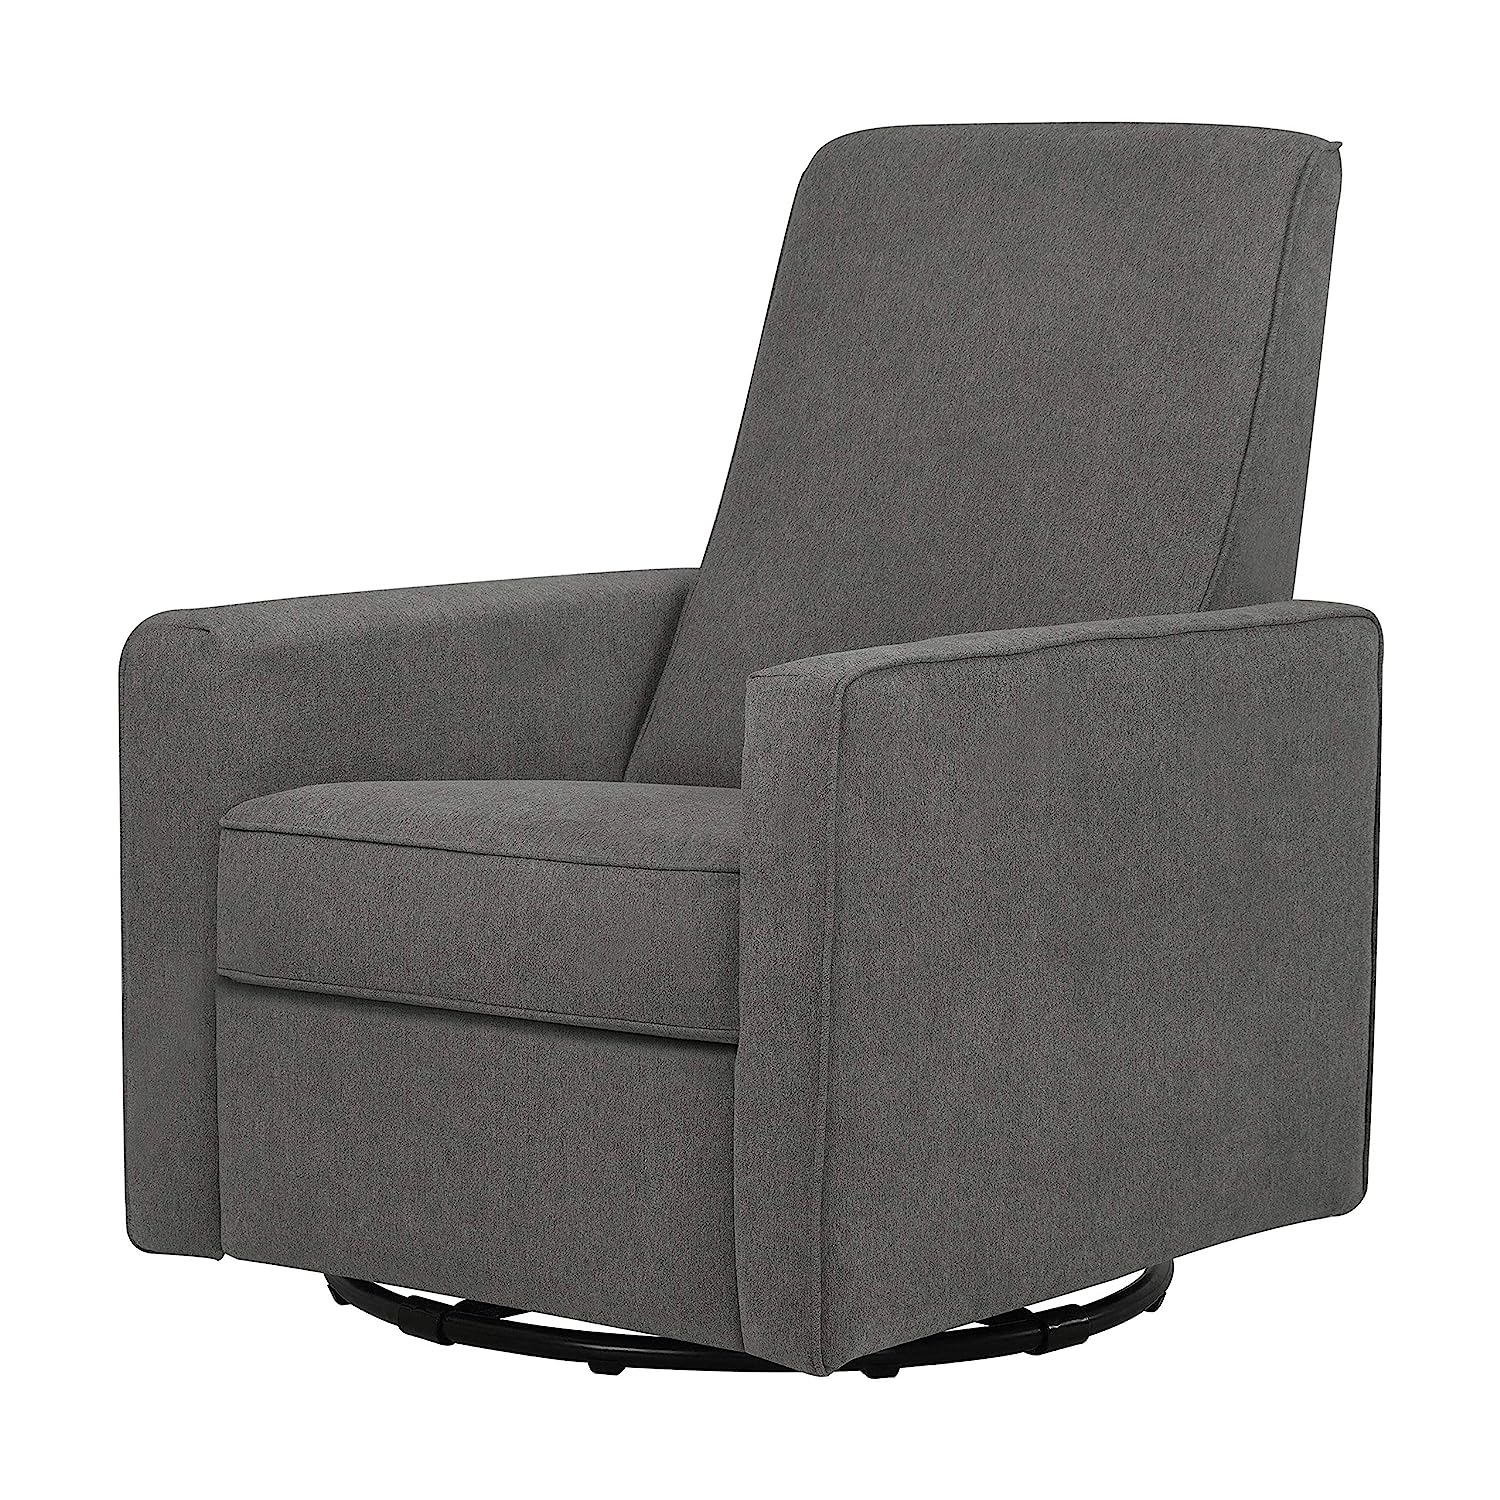 DaVinci Piper Upholstered Recliner and Swivel Glider [...]